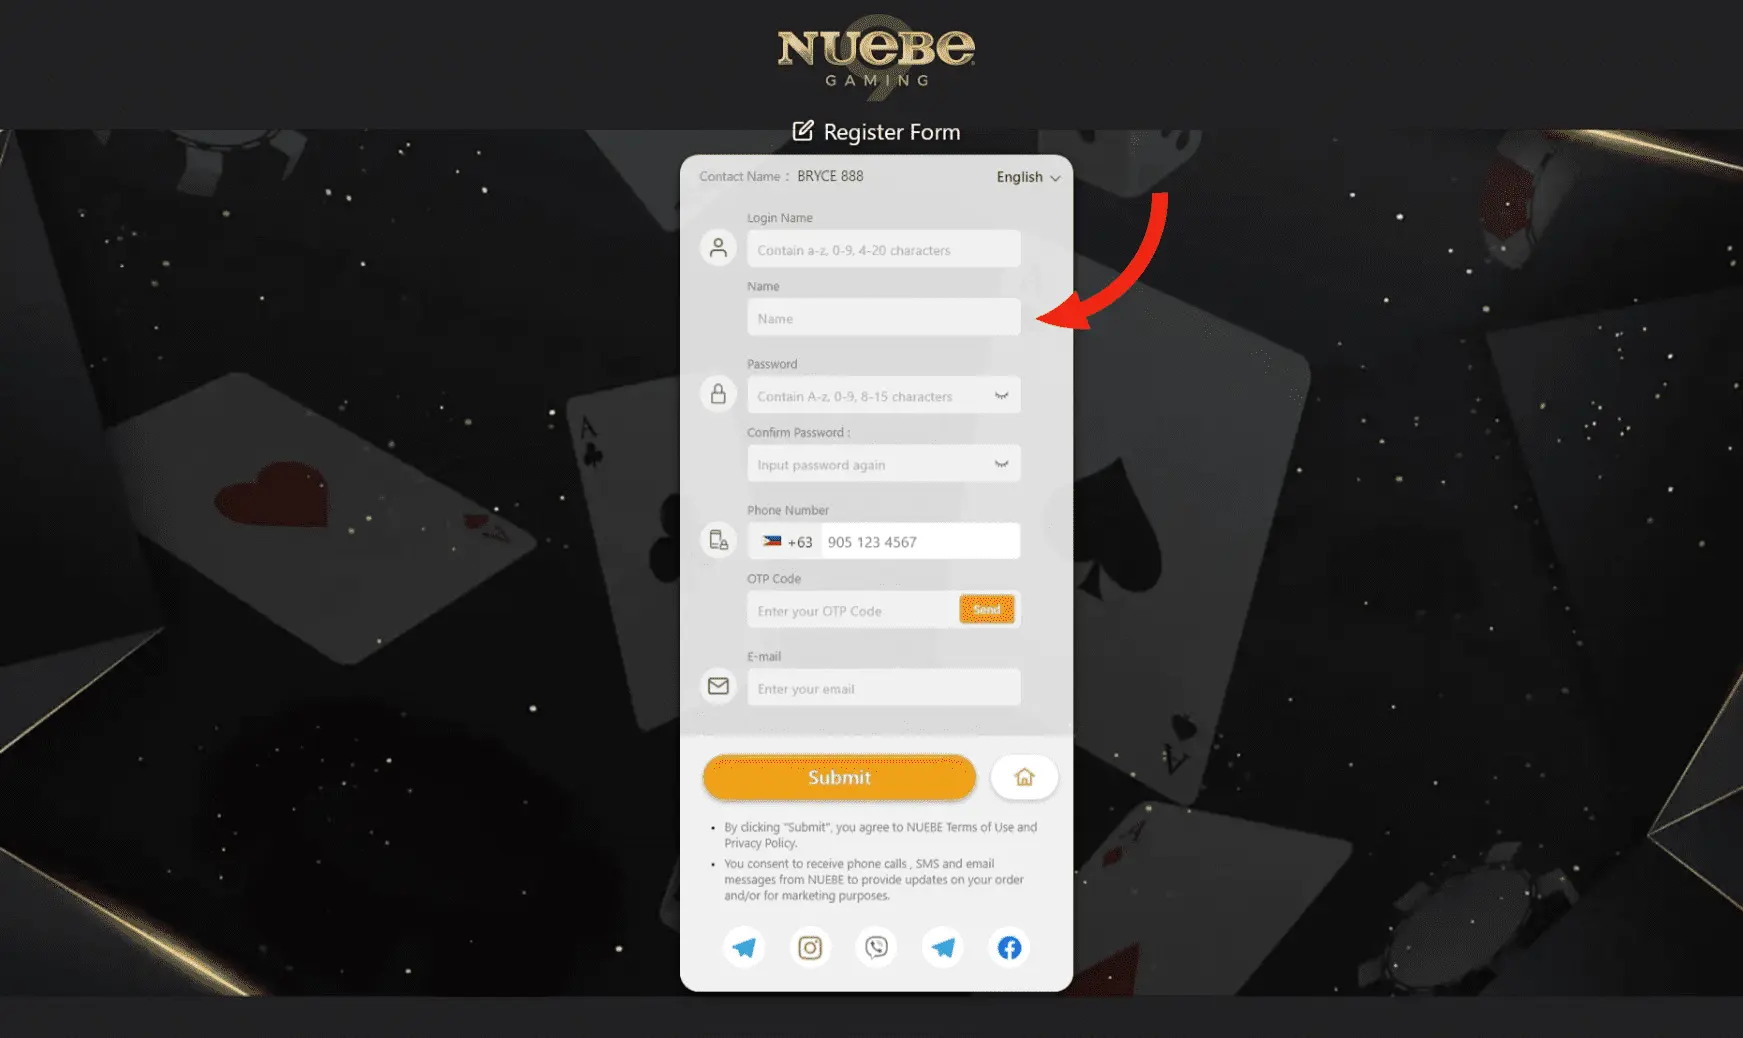 Registration form section on Nuebe Gaming's website, highlighting the field for entering the user's real name, distinct from the login name.